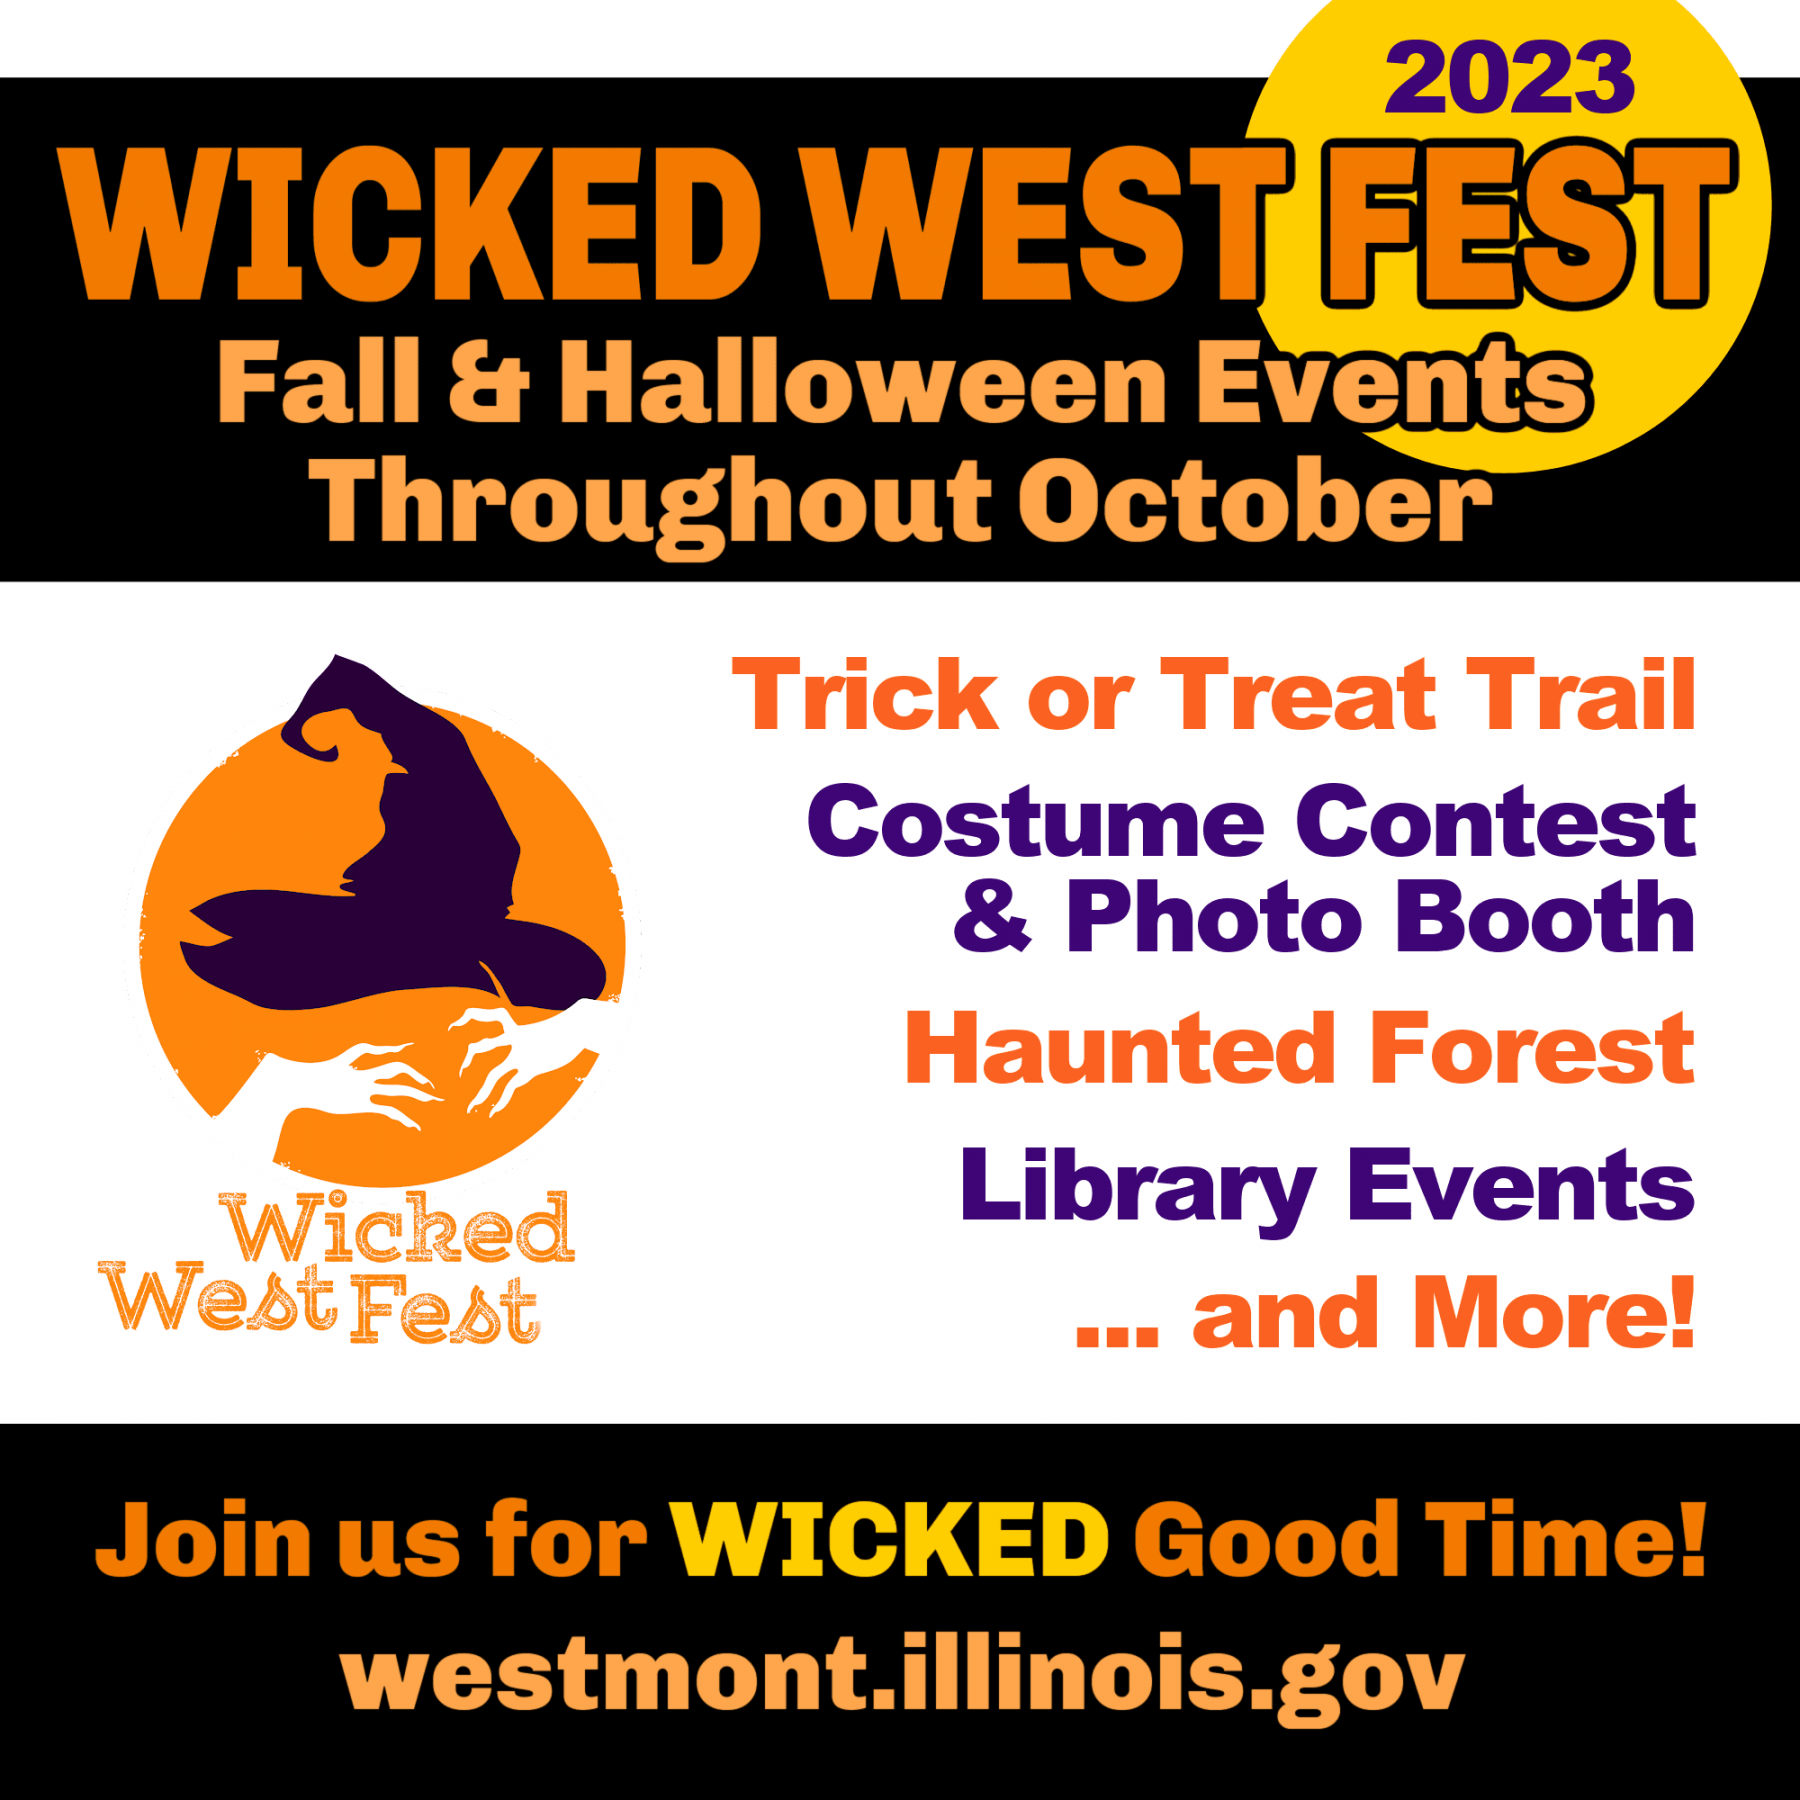 News Flash •  Wicked West Fest Events